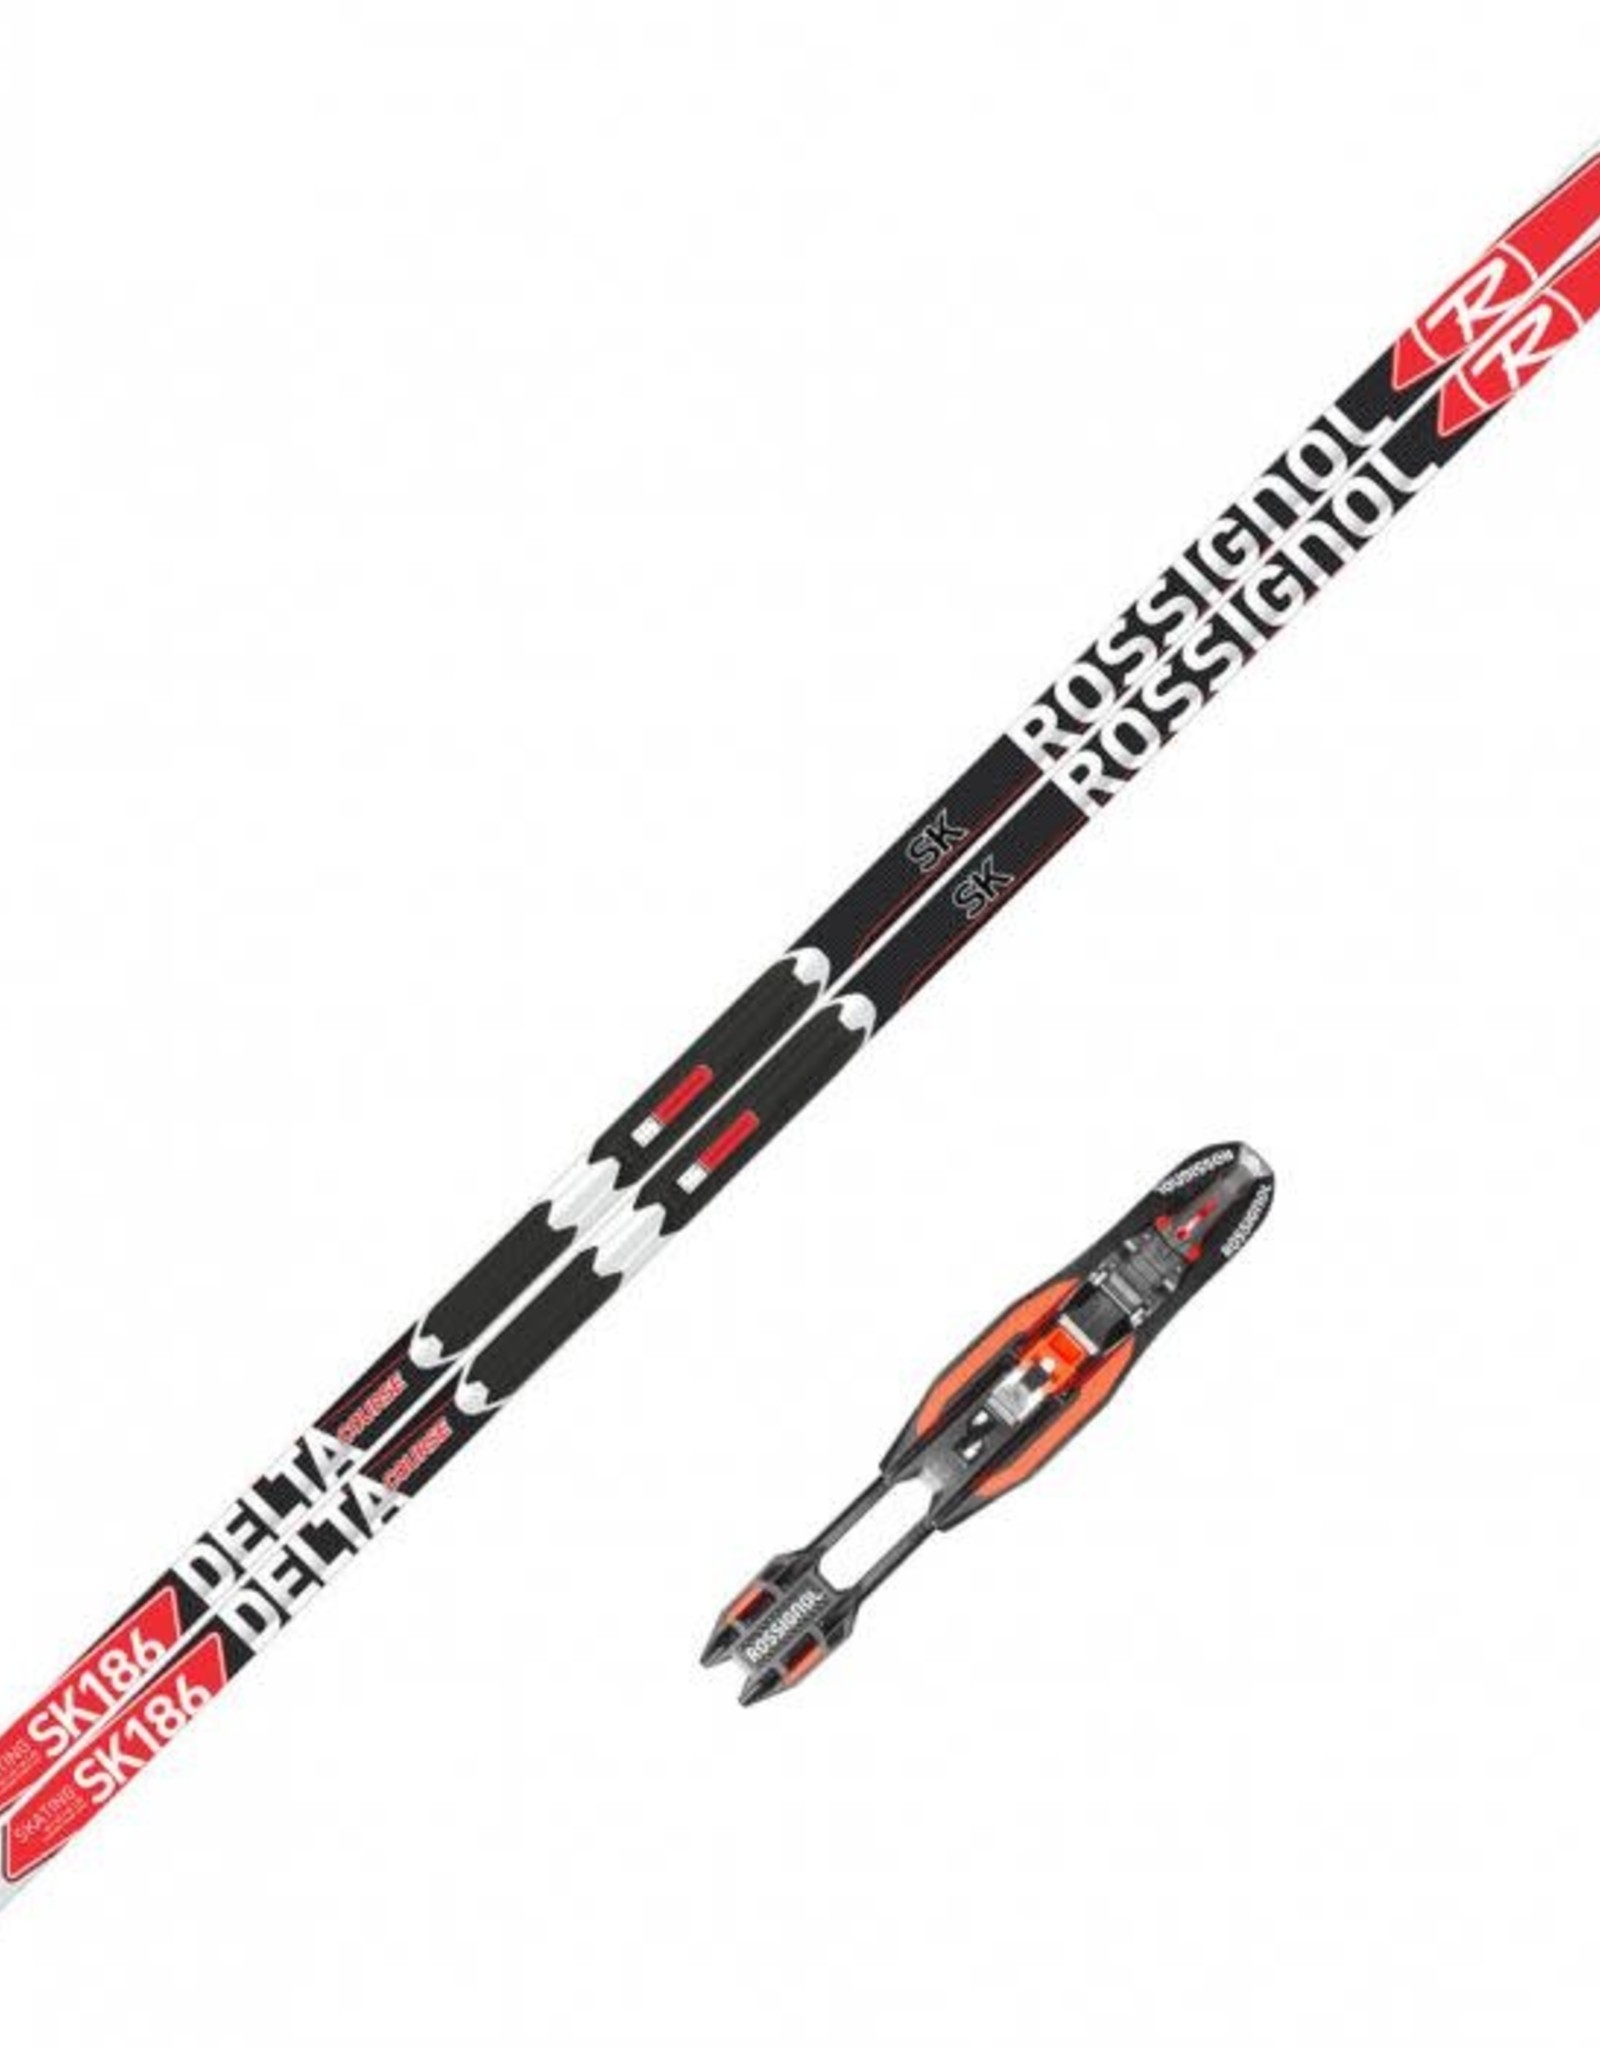 ROSSIGNOL ROSSIGNOL DELTA COURSE Skate Ski IFP 186 *Binding NOT Included